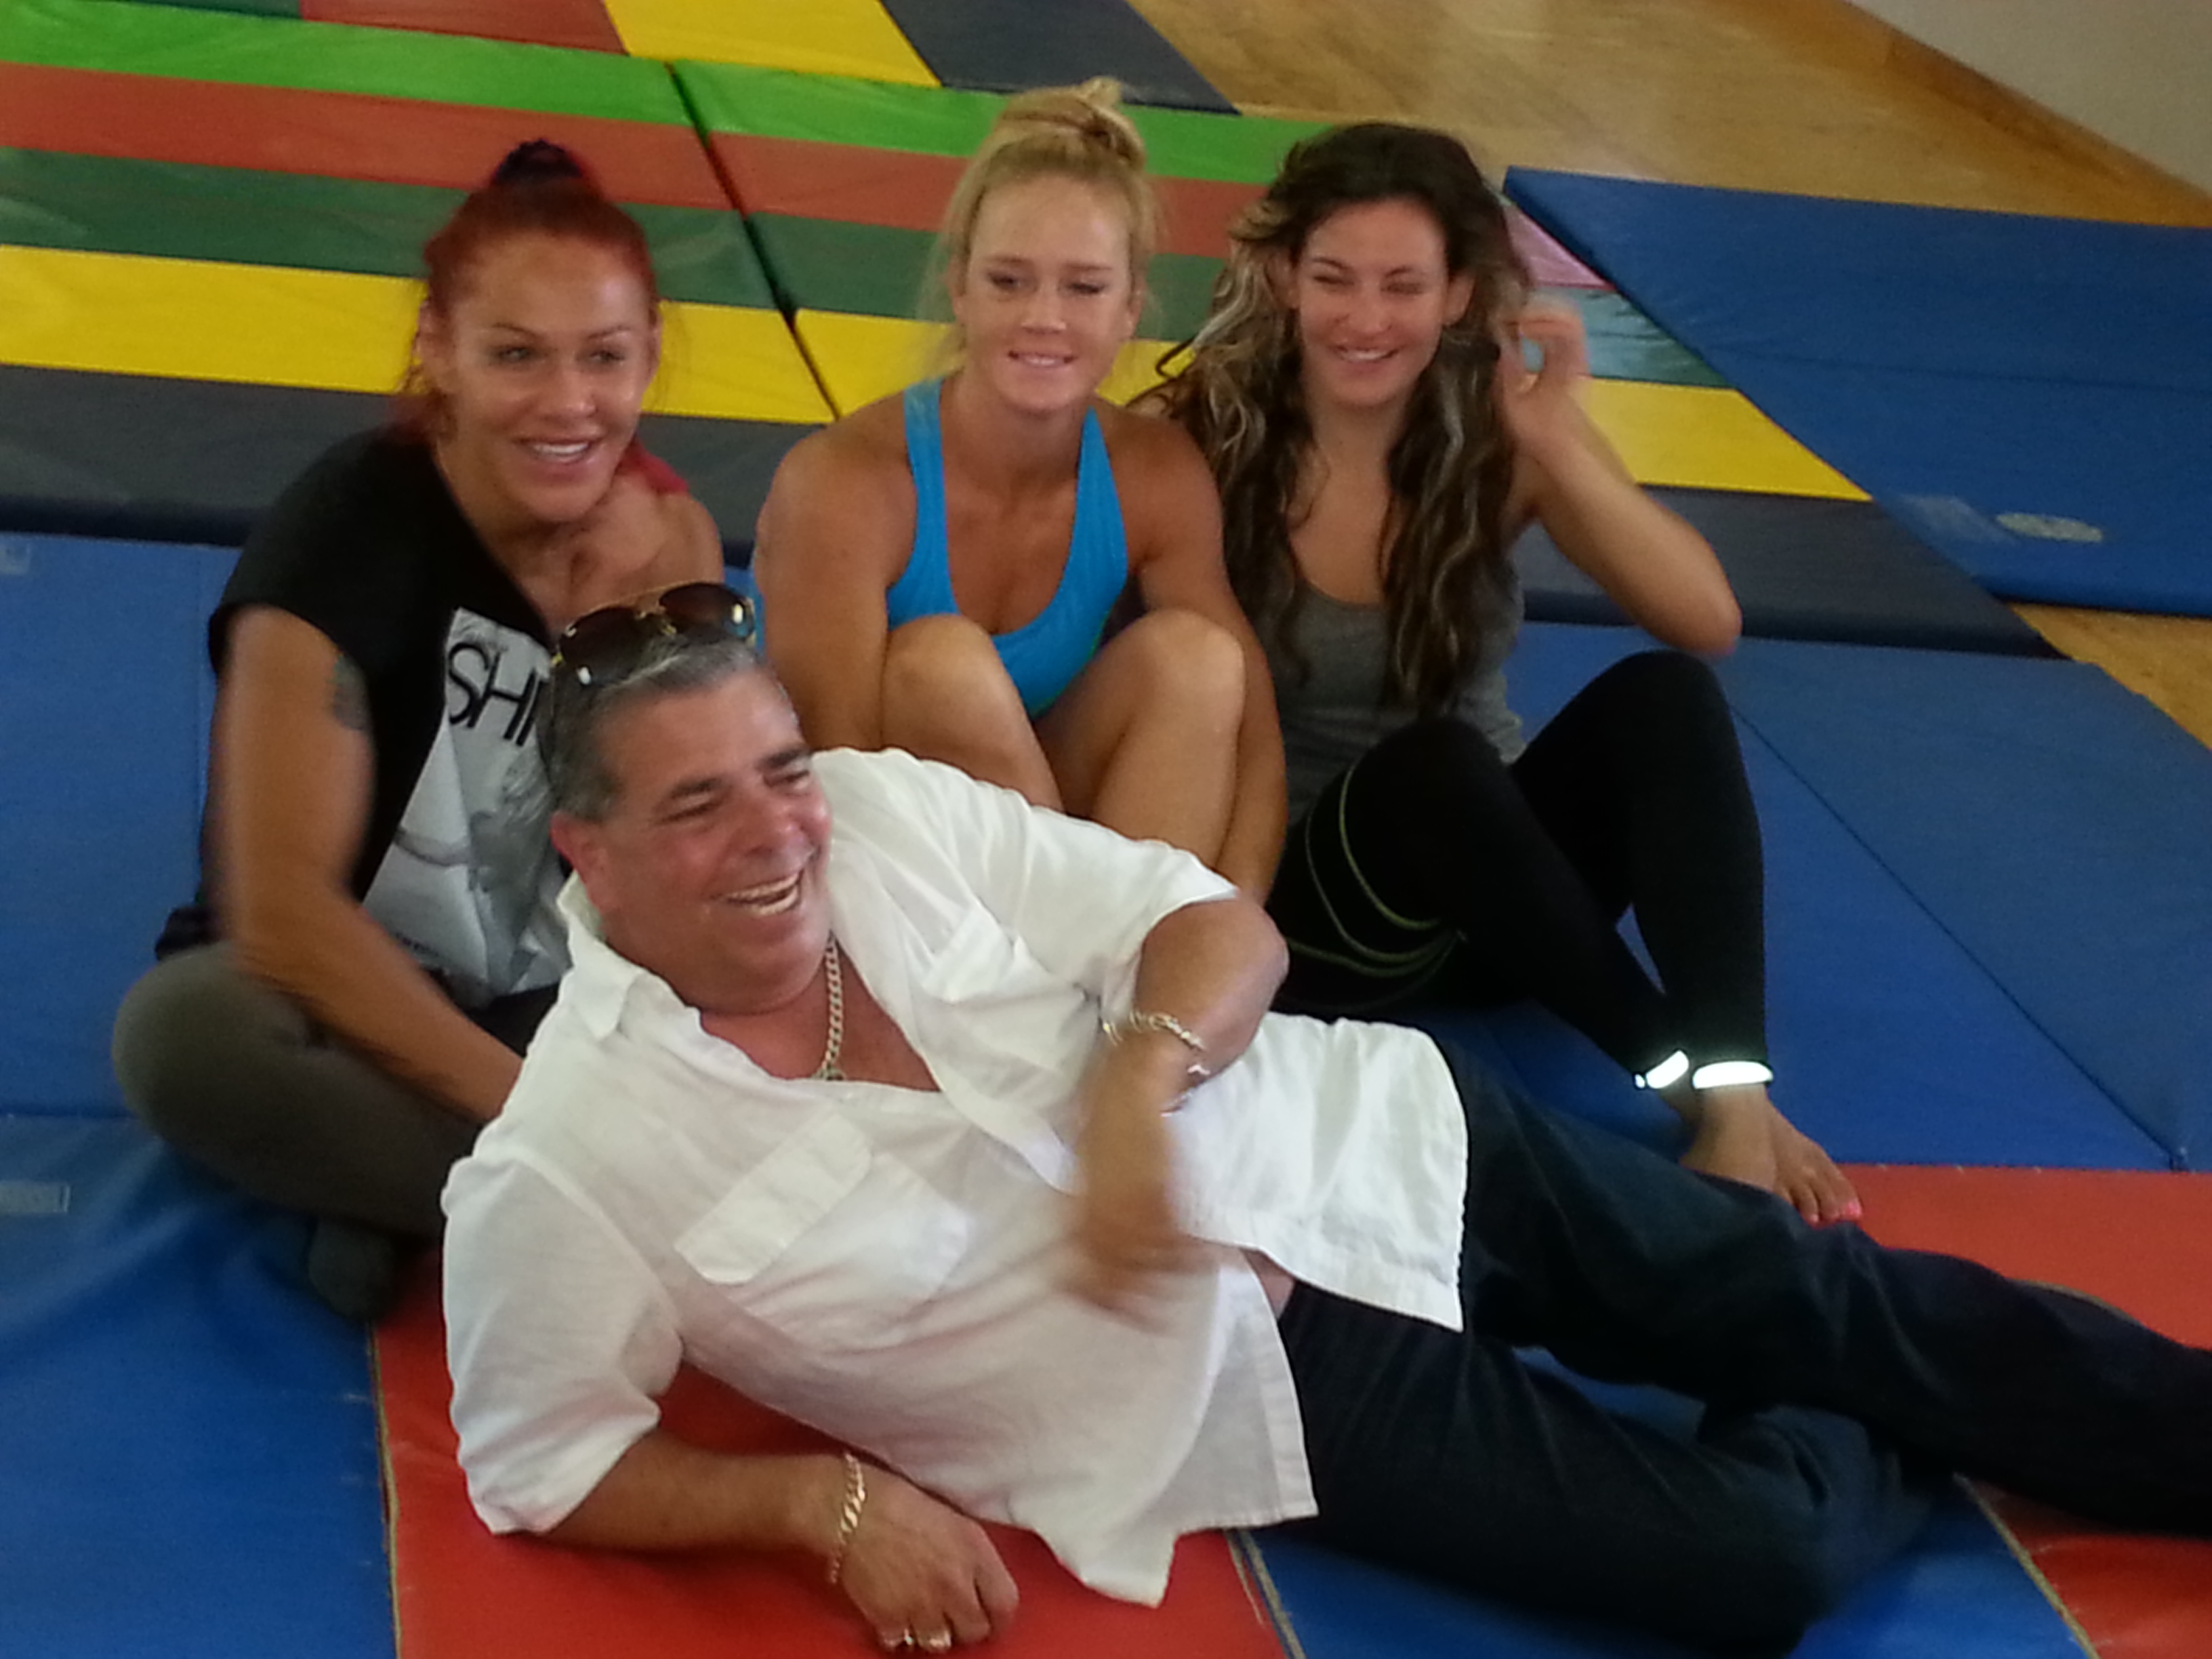 Cris Cyborg, Holly Holm, Miesha Tate and Sal on the set of Fight Valley.